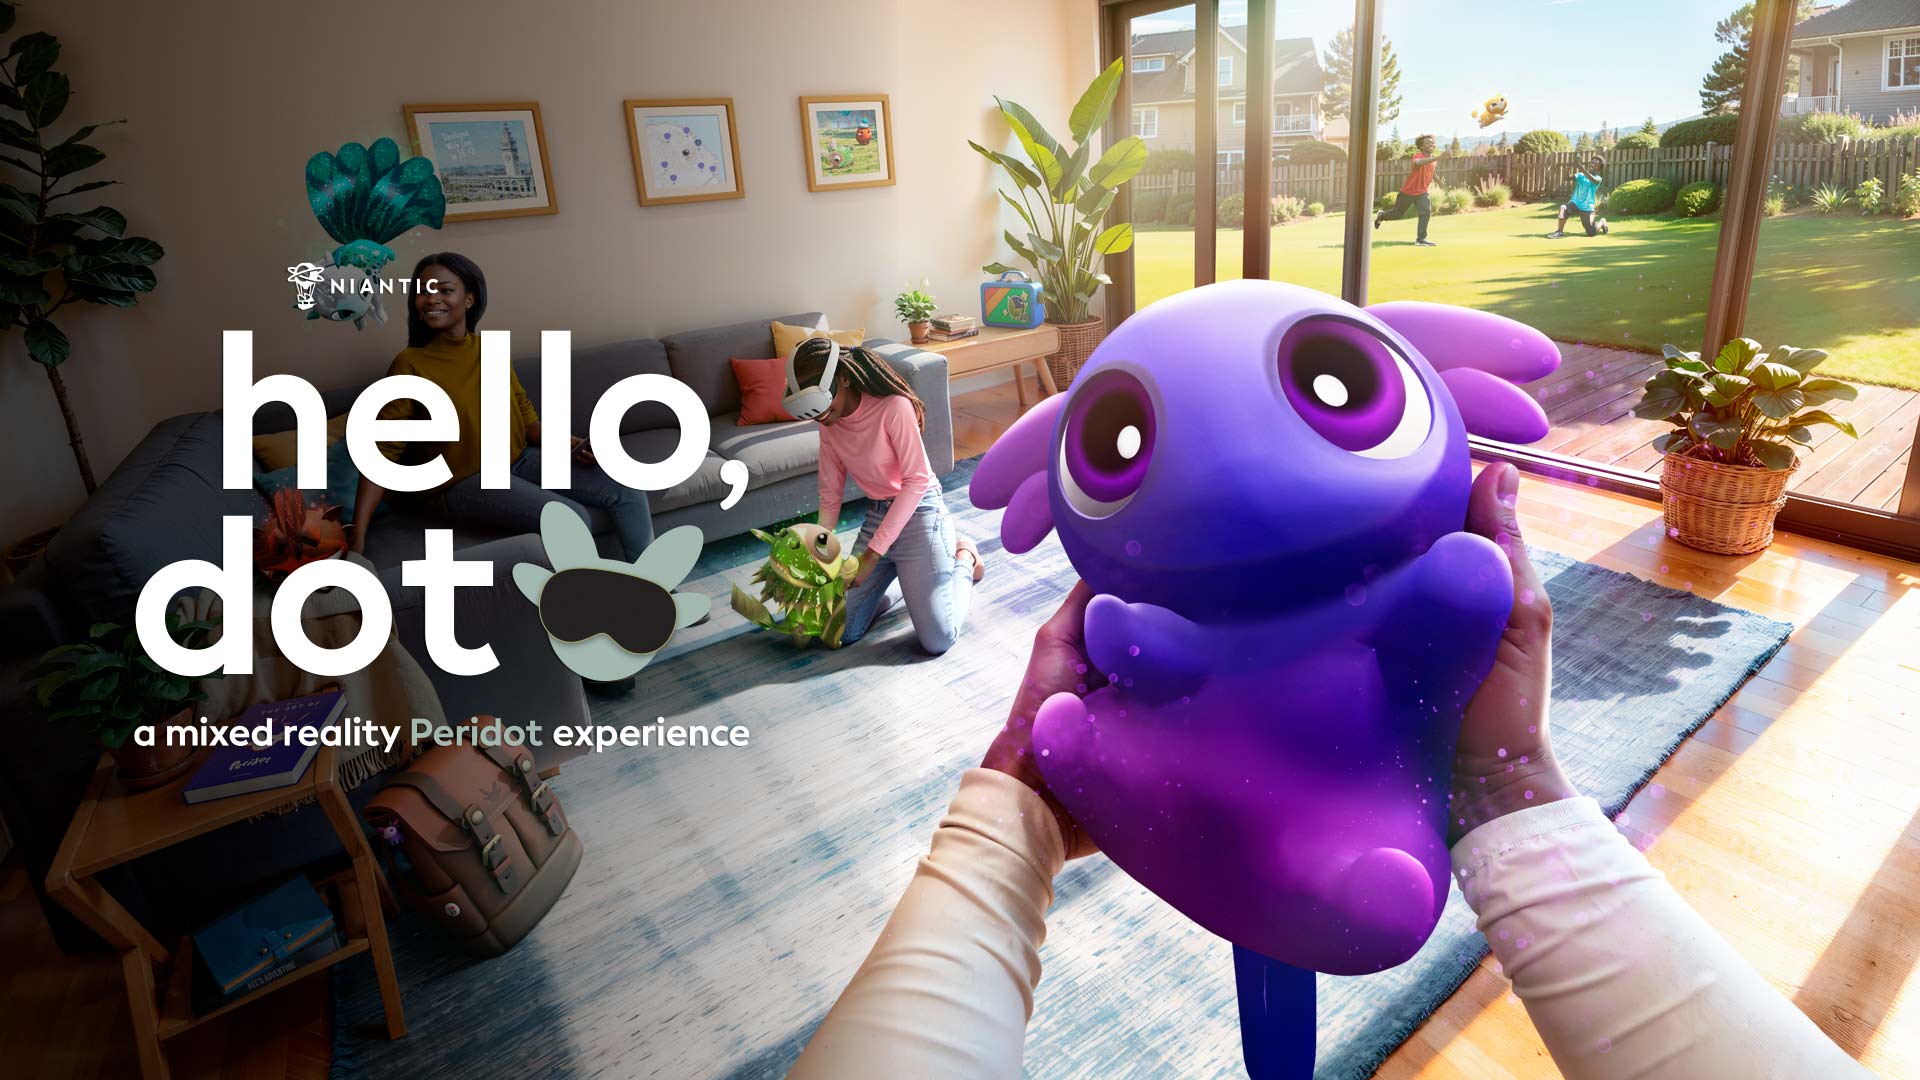 ‘Pokémon Go’ Studio Releases Mixed Reality Pet ‘Hello, Dot’, Now Available on Quest 3